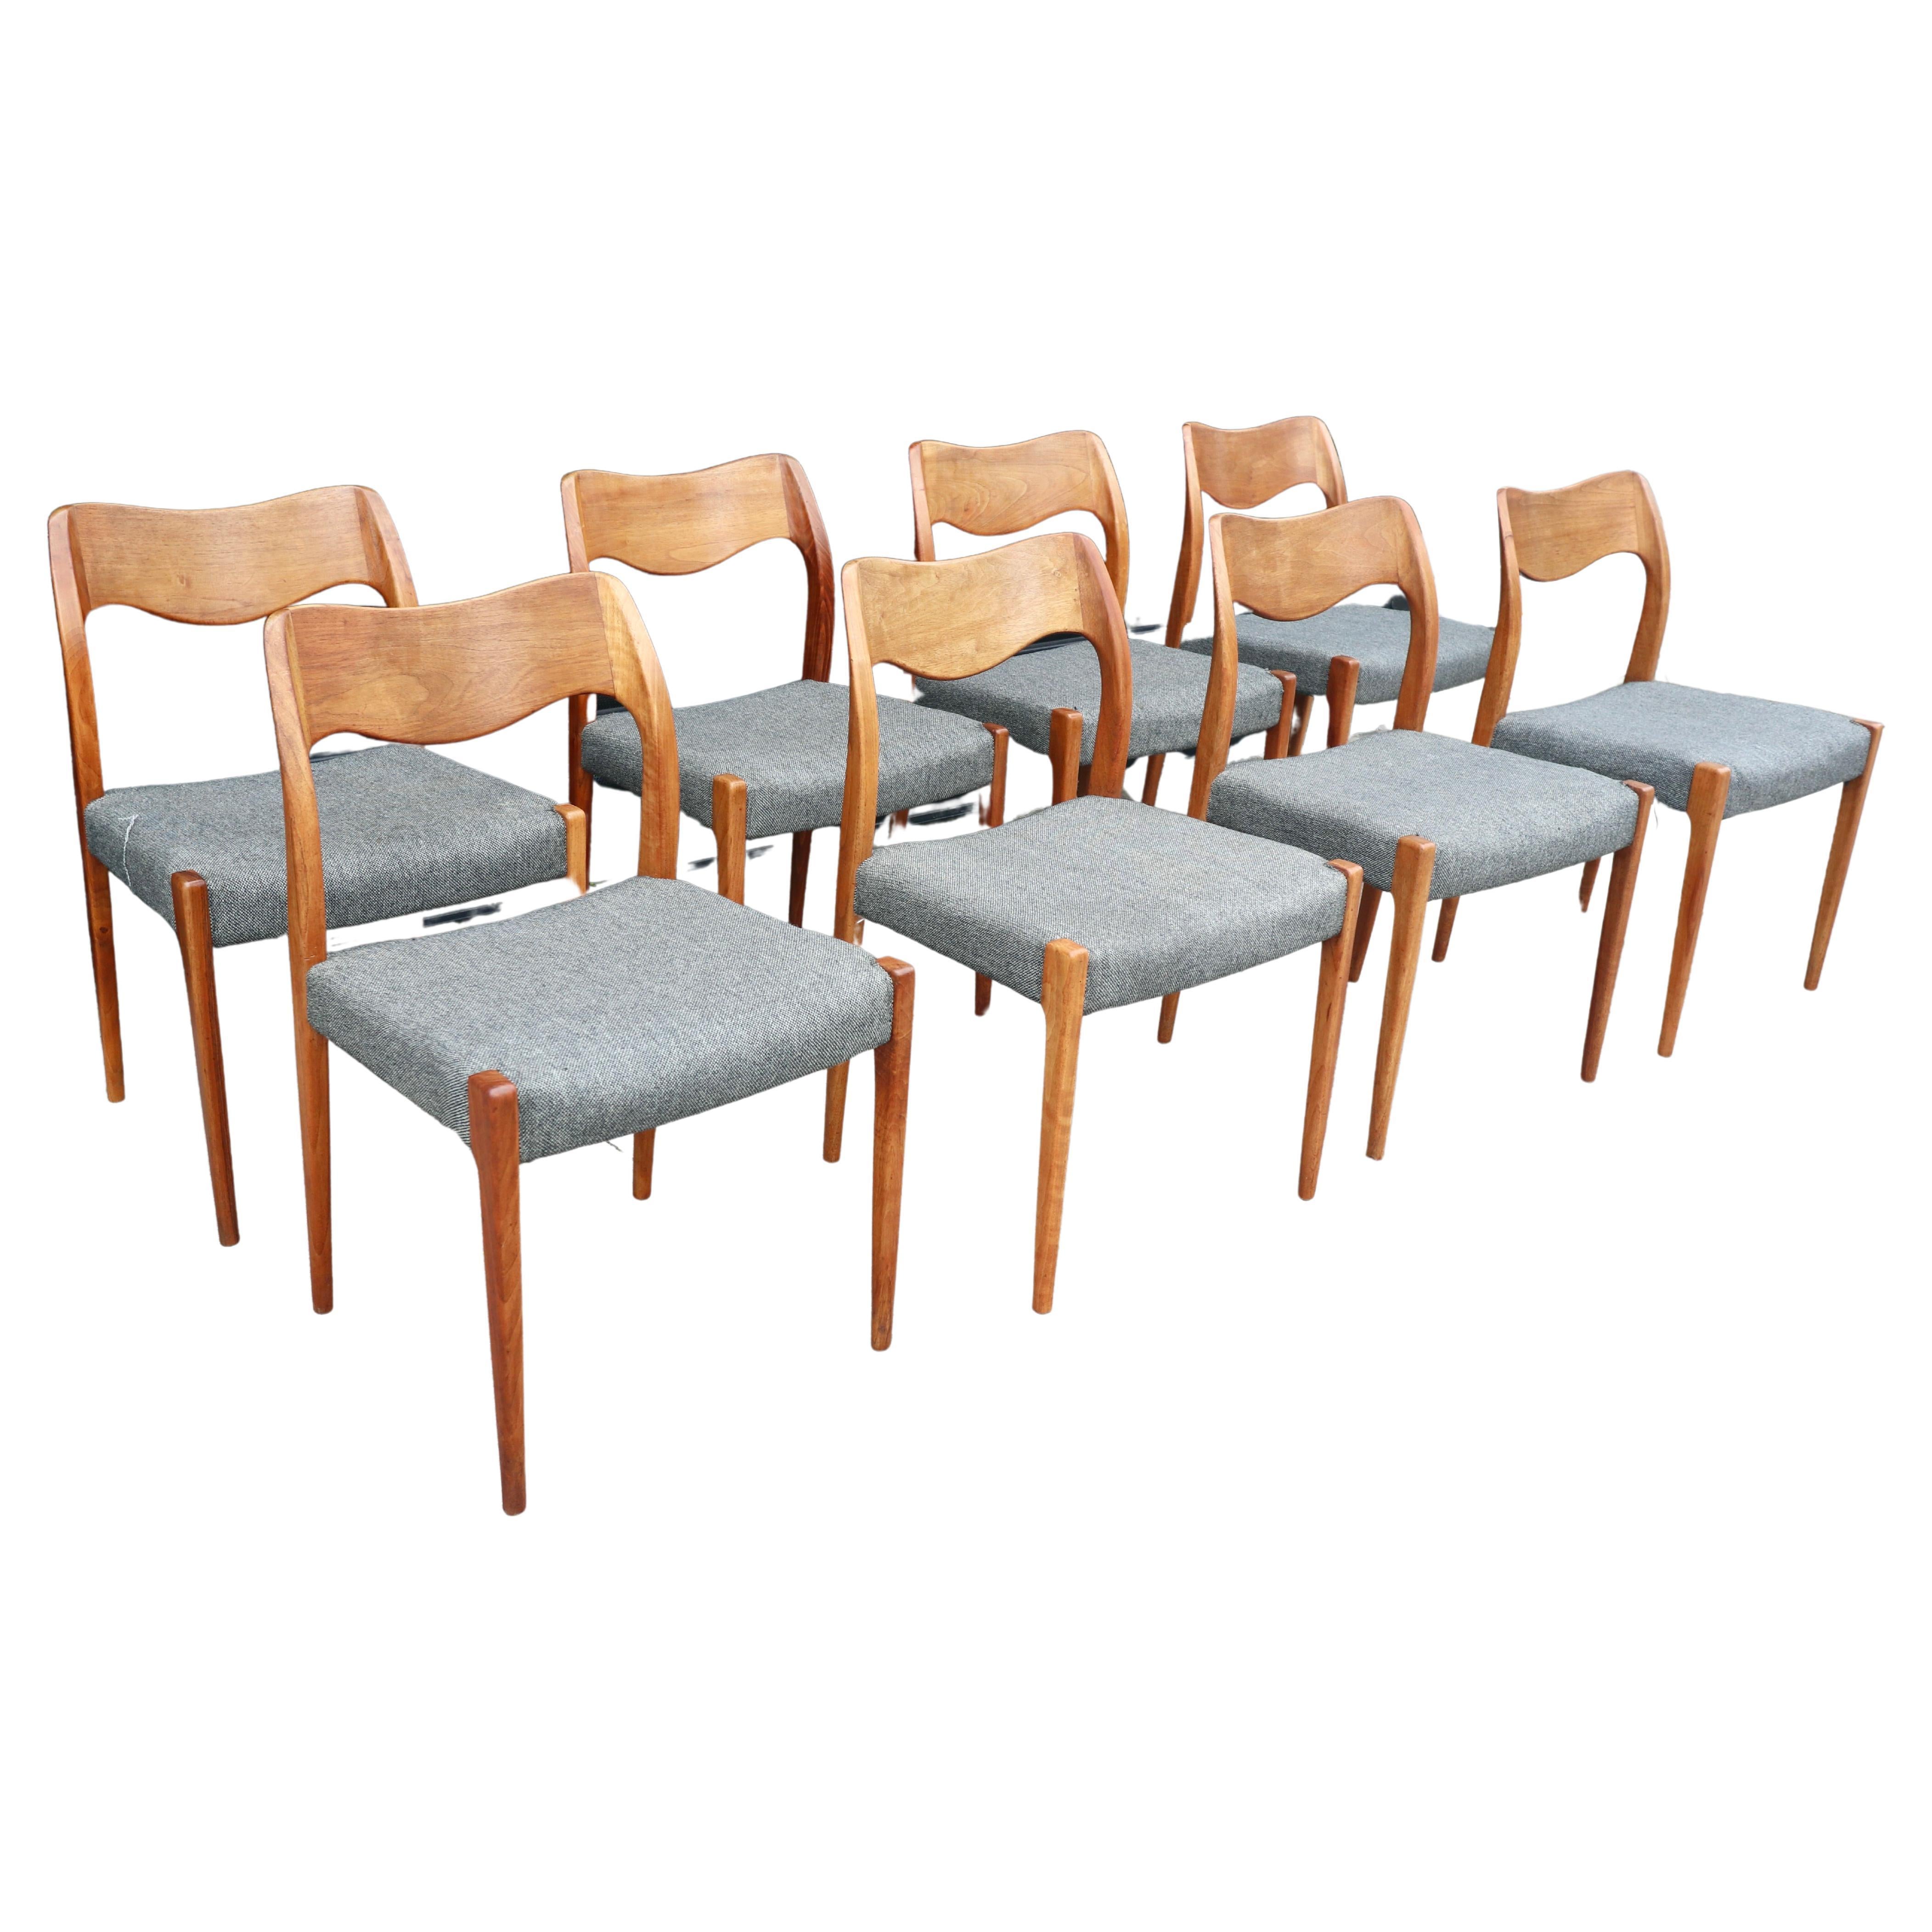 Eight stunning and rare 1960s vintage solid Walnut framed Danish model 71 dining chairs. Designed by Niels O Moller and manufactured by J.L. Møller, these chairs are in very good vintage condition, The wooden frames, having been sympathetically